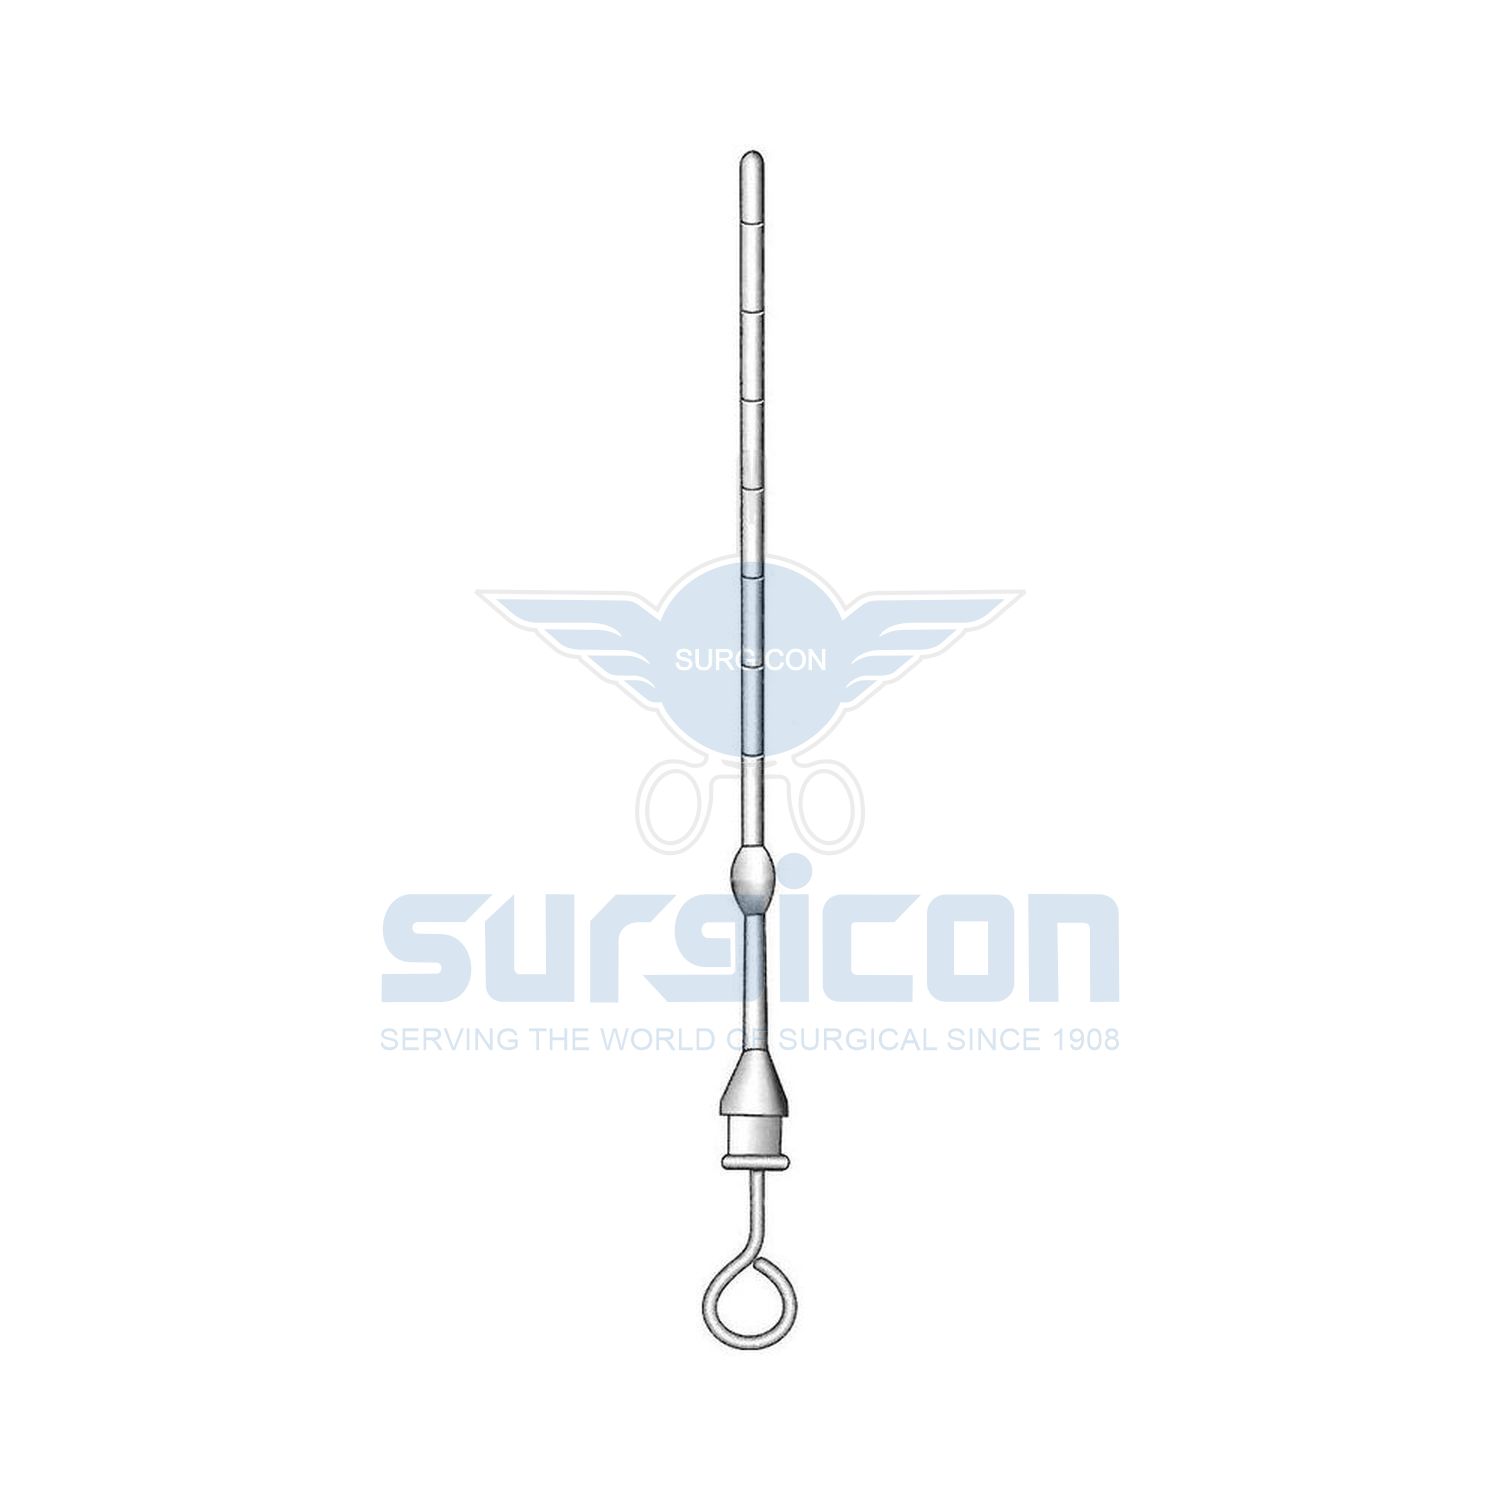 Elsberg-Exploring-Cannula,-Suction-Tube-&-Tampons-Cannula-J-25-920